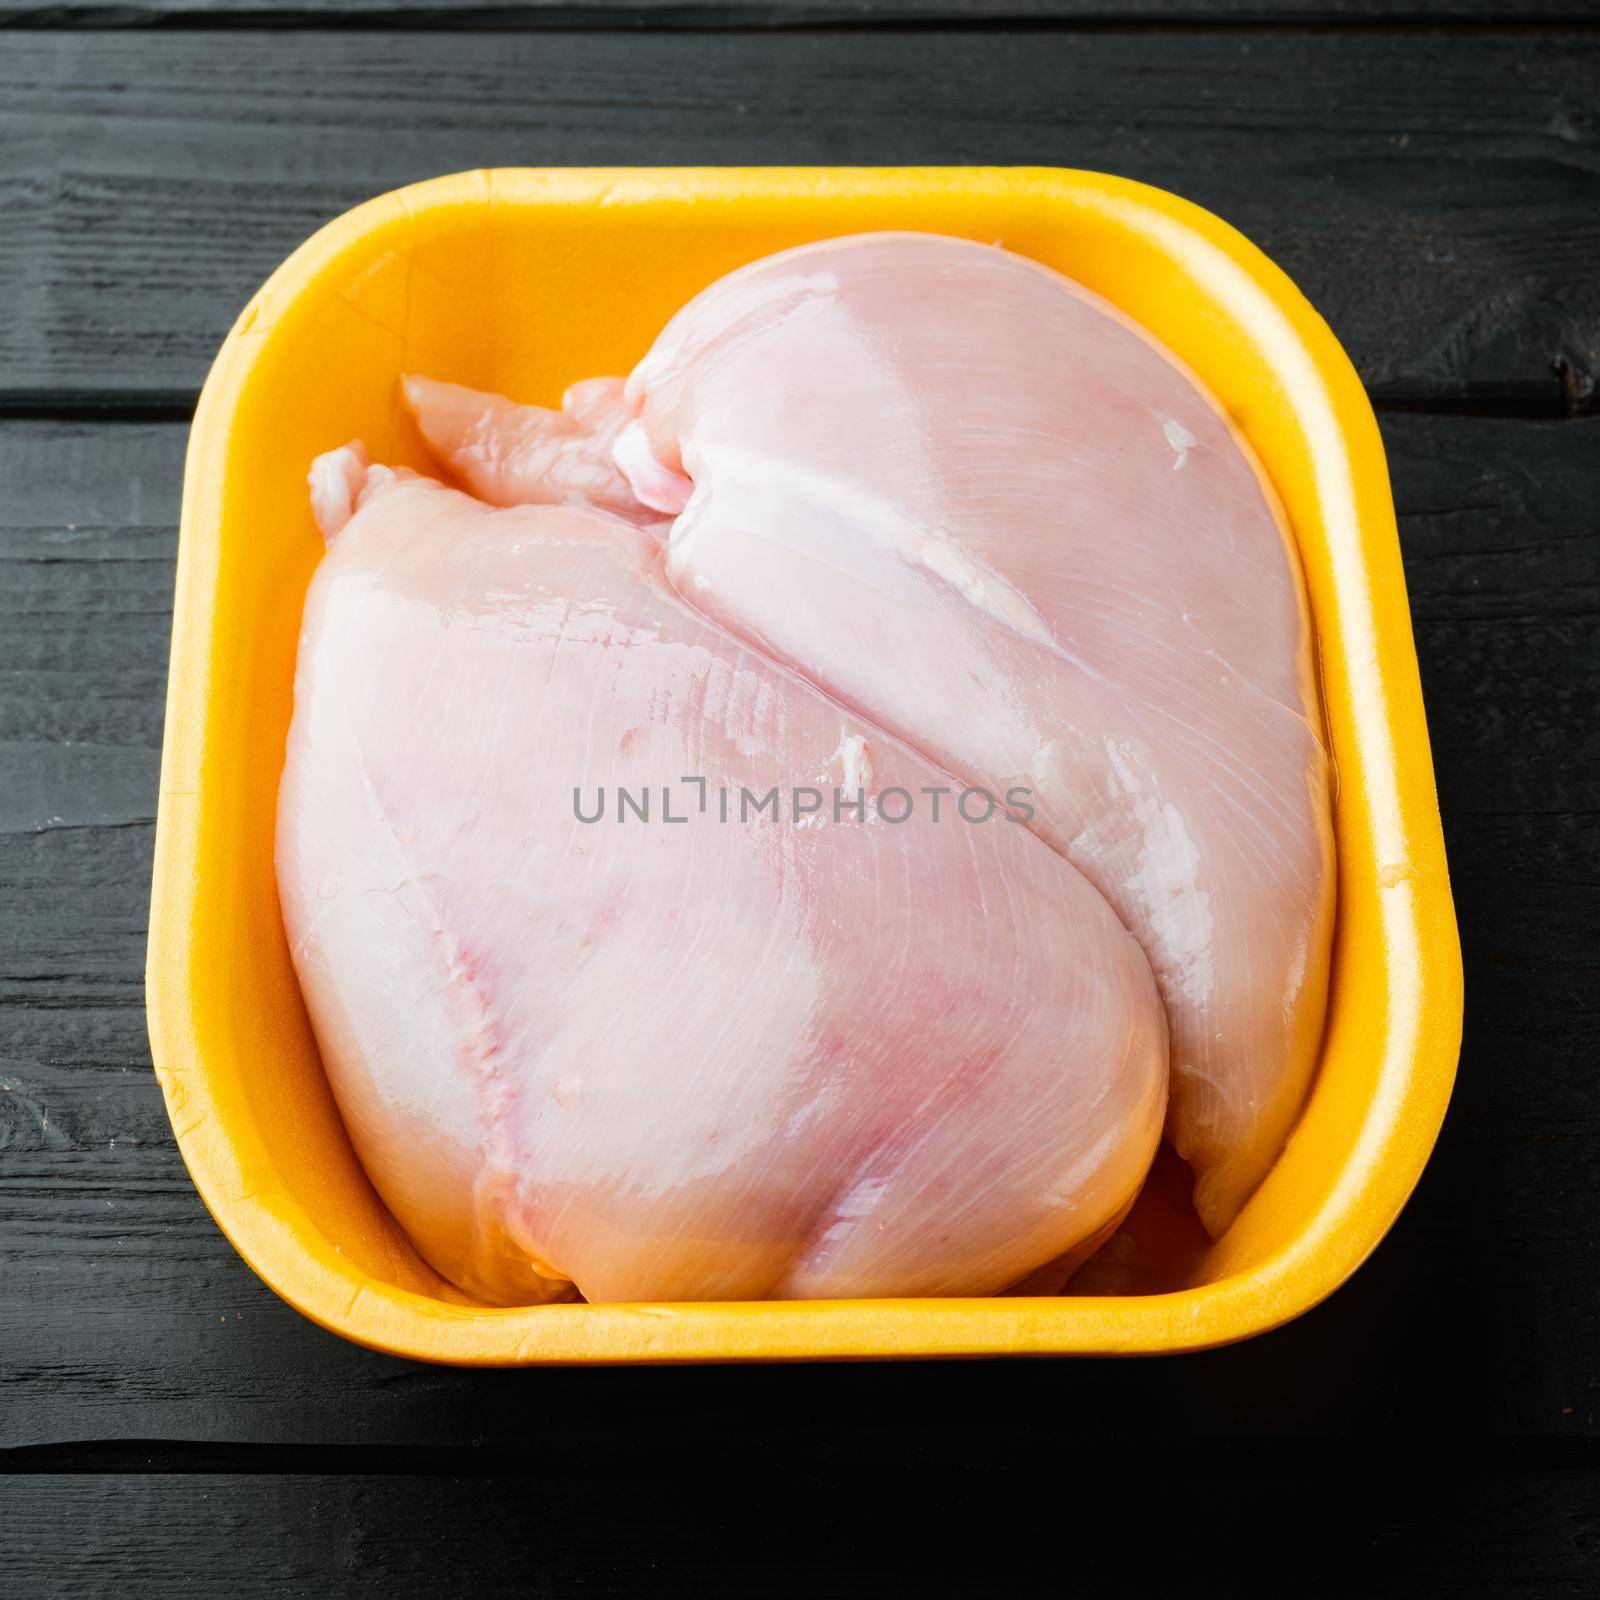 Raw chicken breast fillets in tray, on black wooden table